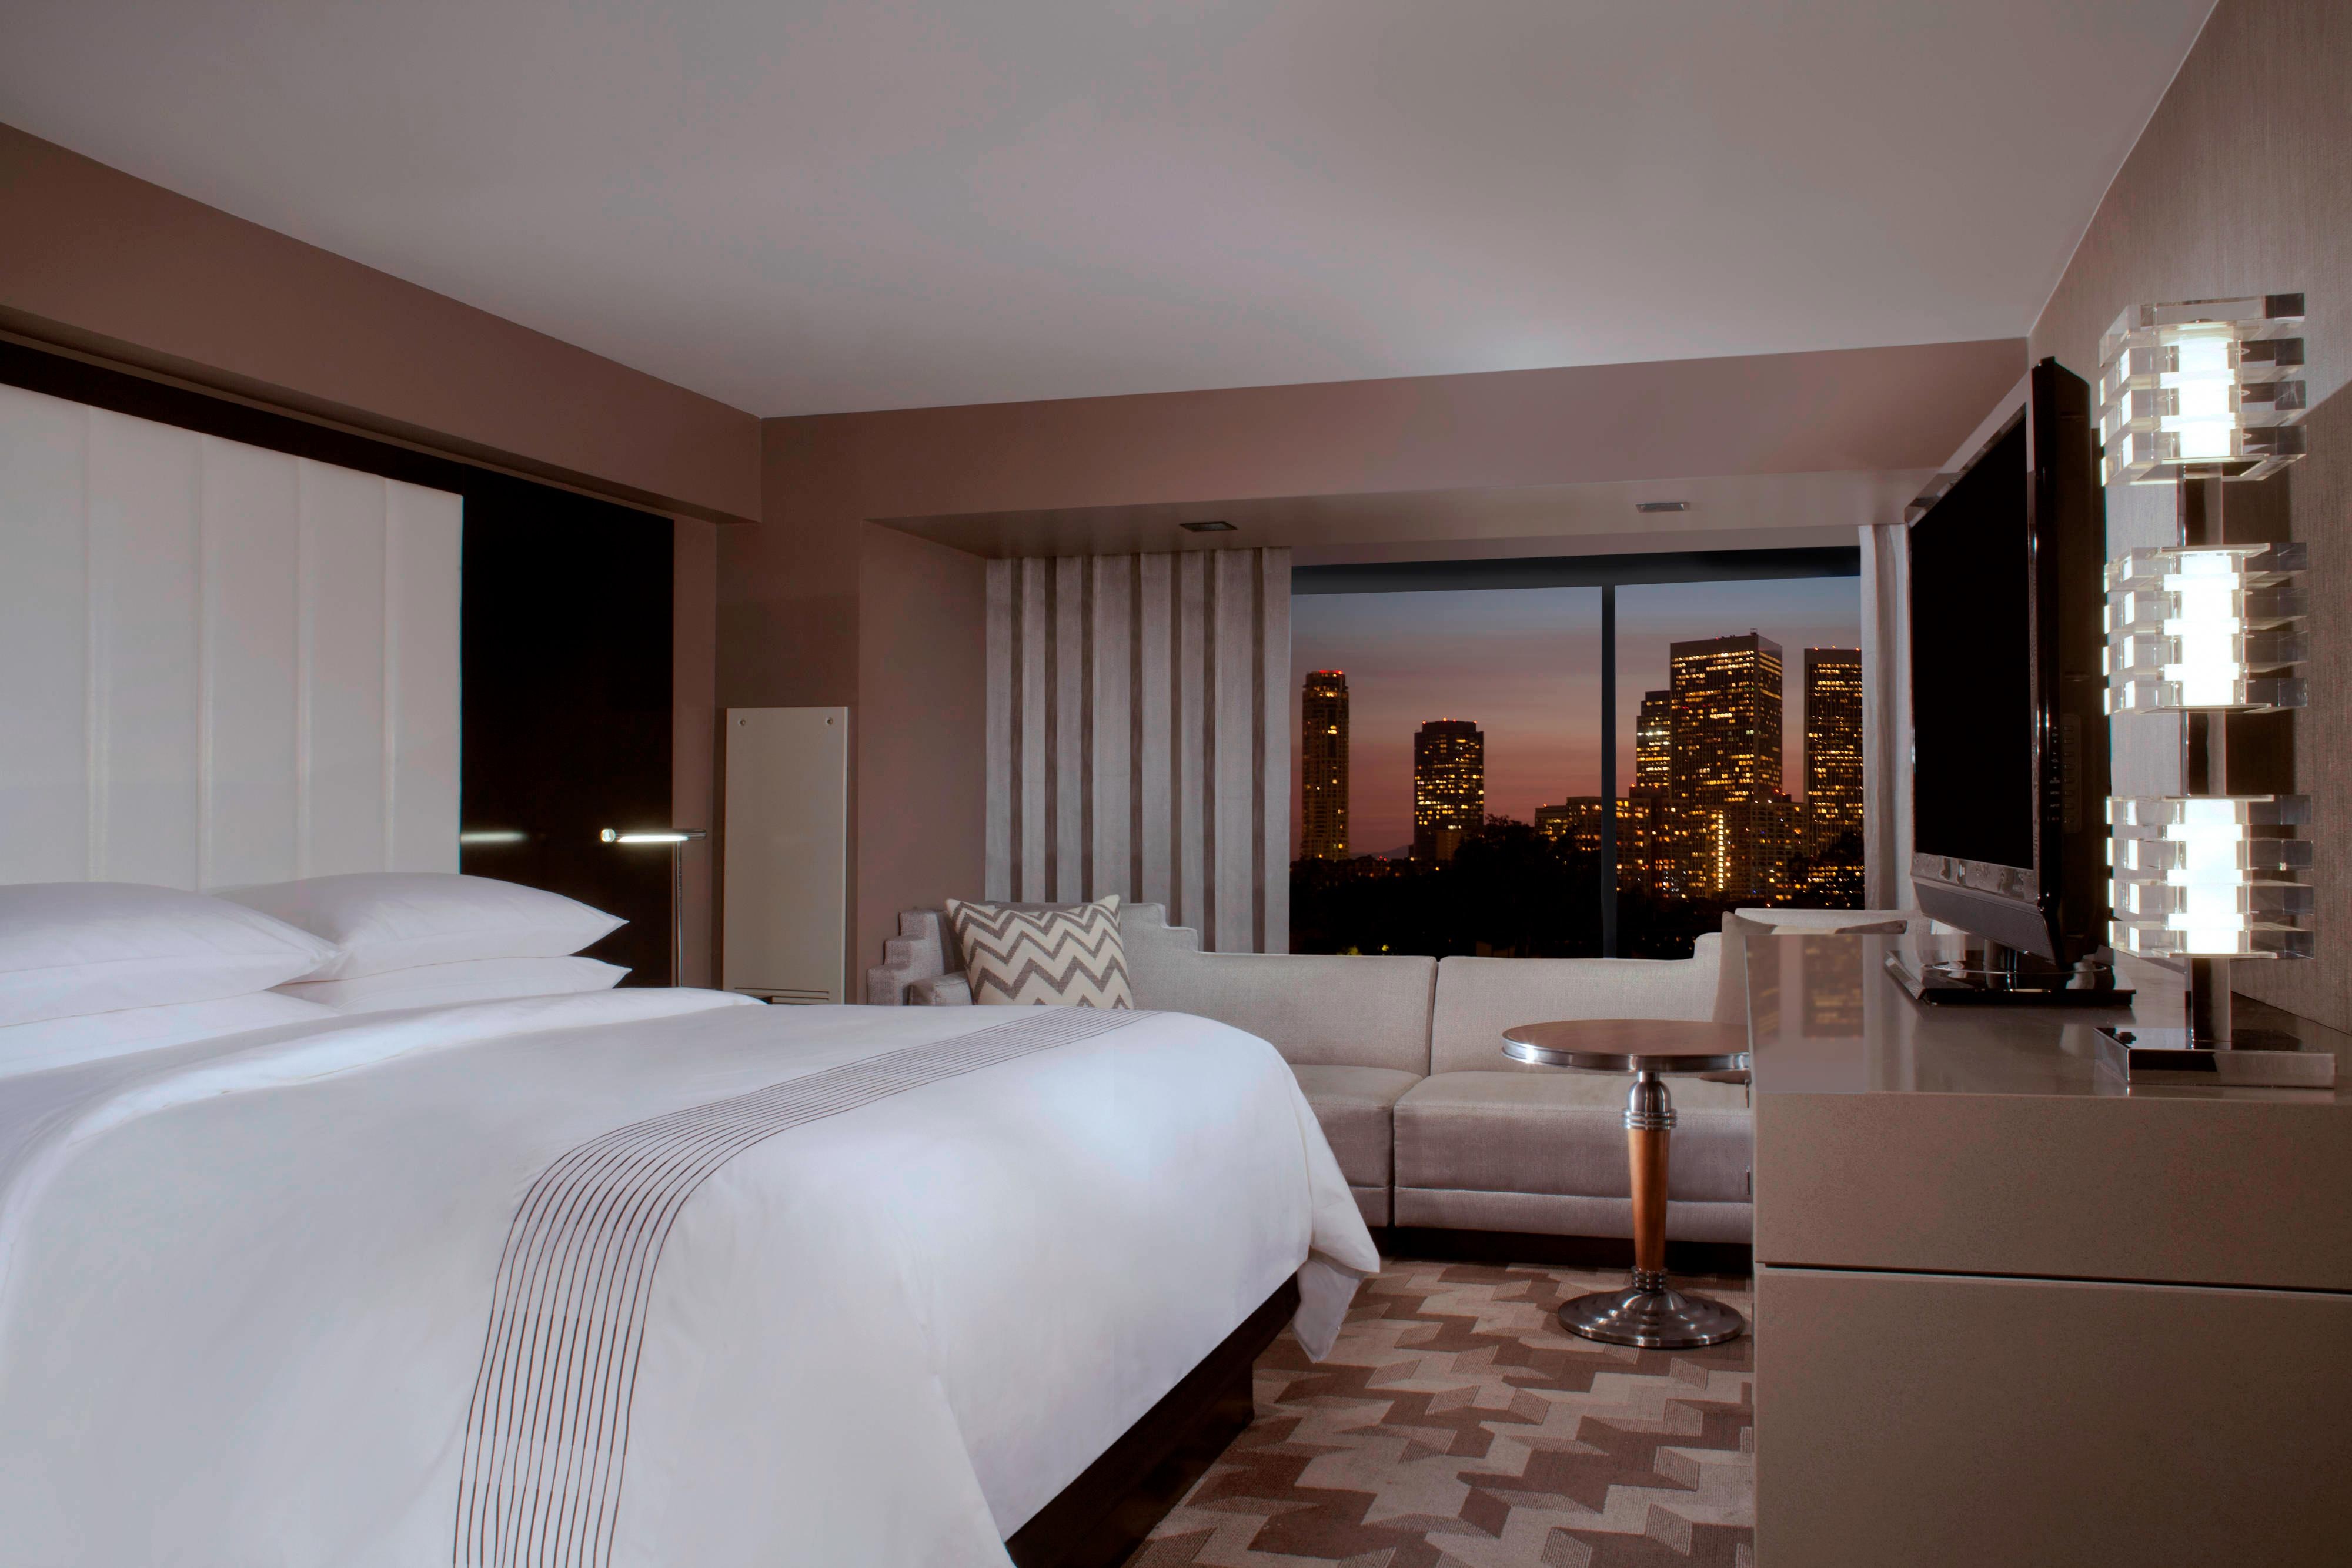 Guest room with city view